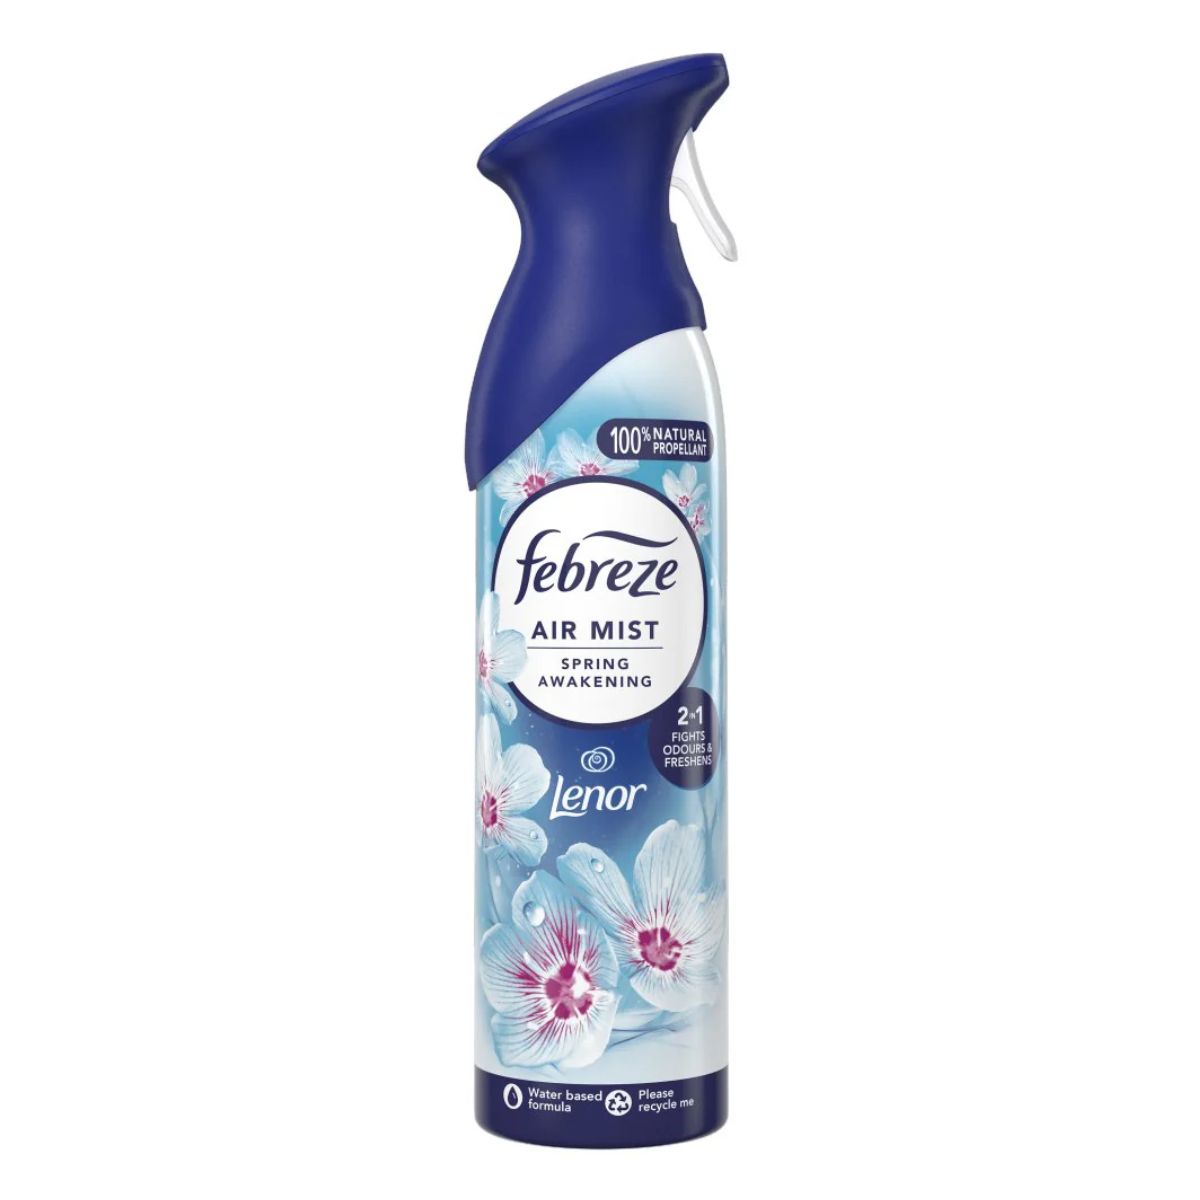 A bottle of Febreze Air Freshener Spray Spring Awakening - 185ml by Lenor, featuring floral imagery and a blue cap.